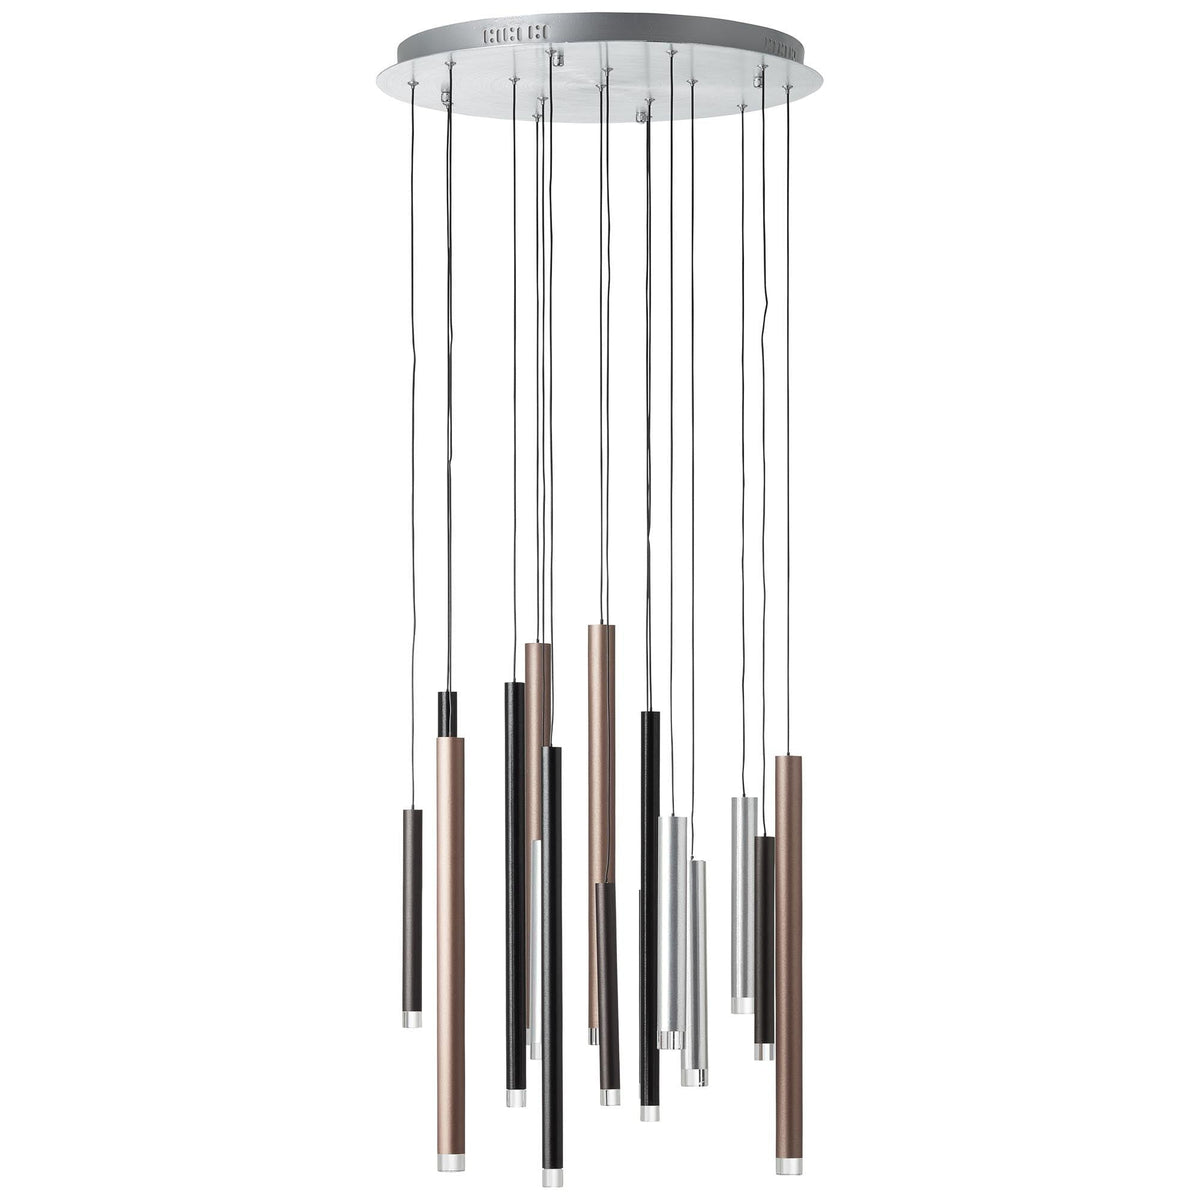 Brilliant 16 Light Cembalo LED Pendant Light - Brown &amp; Coffee | G93730/20 from DID Electrical - guaranteed Irish, guaranteed quality service. (6977611858108)